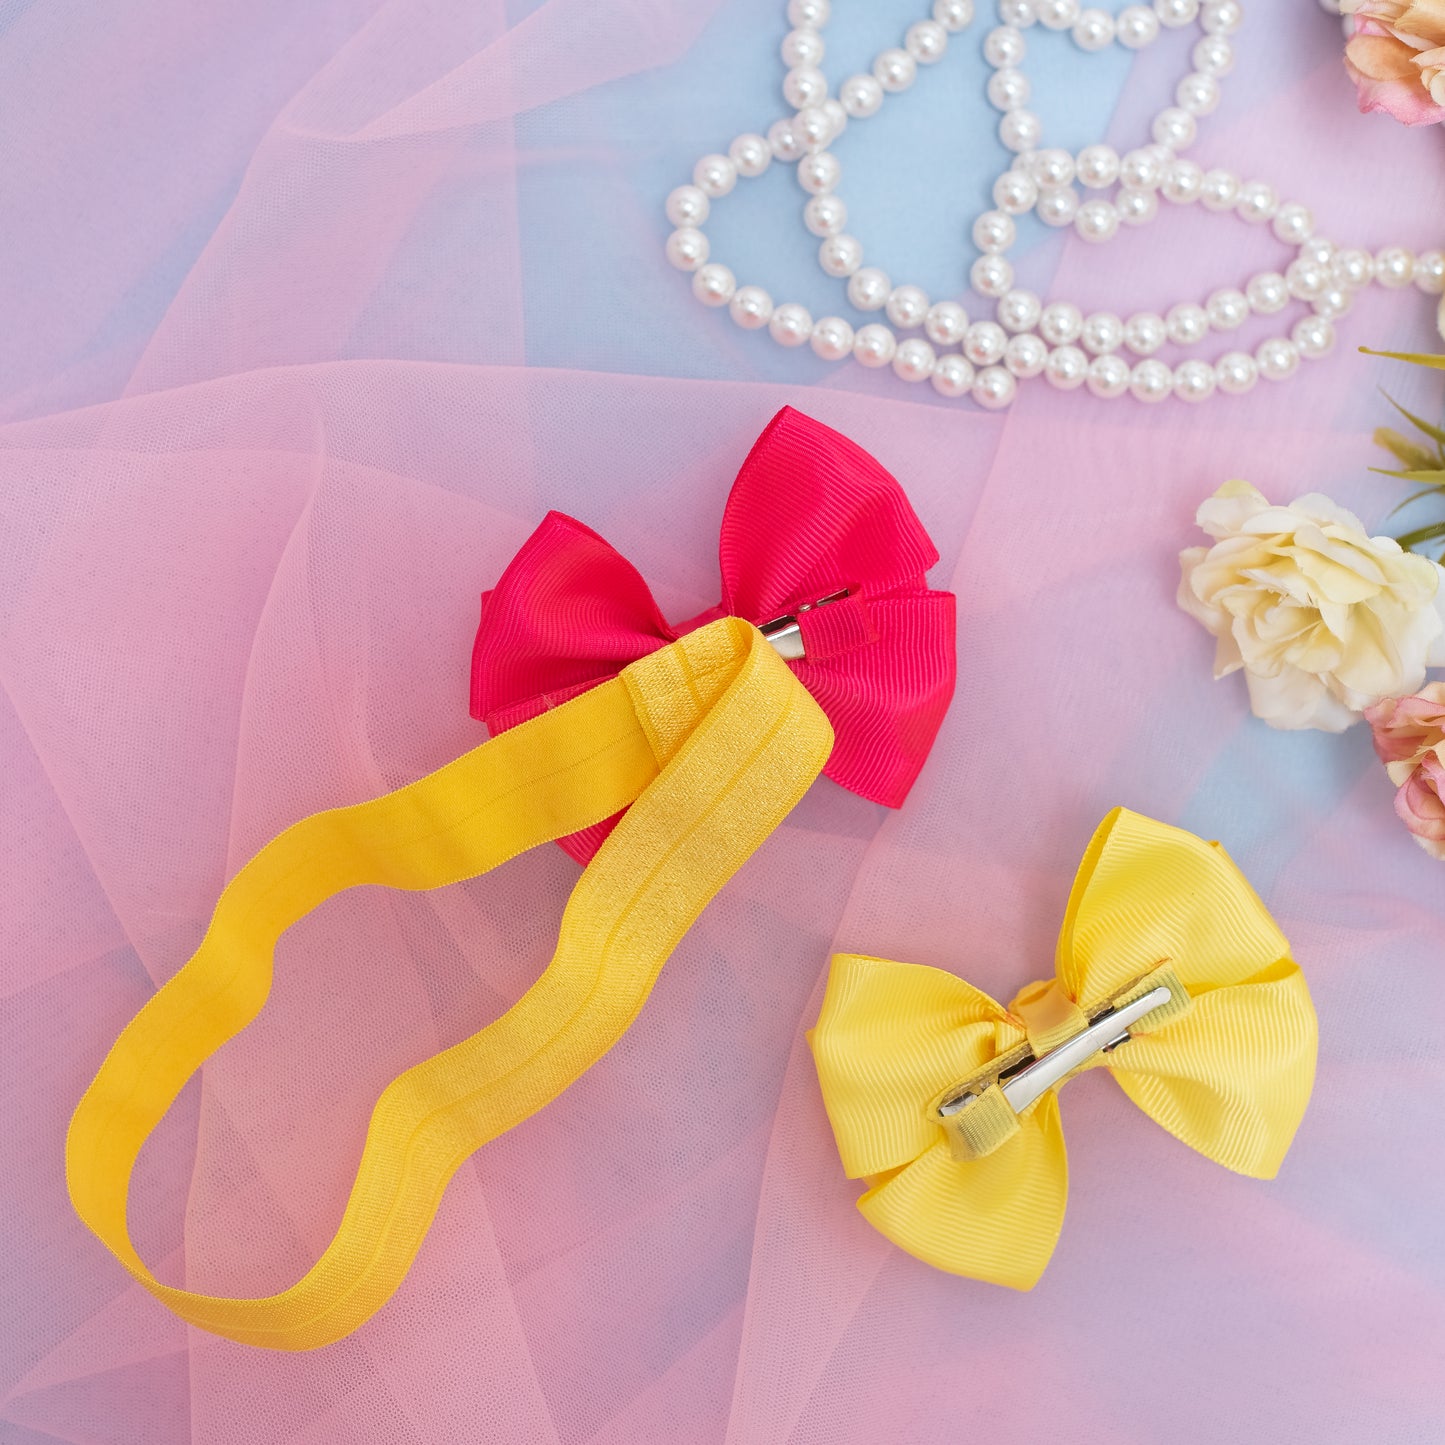 Combo: 1 Stretchy Band with 2 Layered Bows embellished with Sequinze and Pearls - Yellow, Hot Pink (Set of 1 strechy band, 2 Large Layered Bows = 3 quantity)